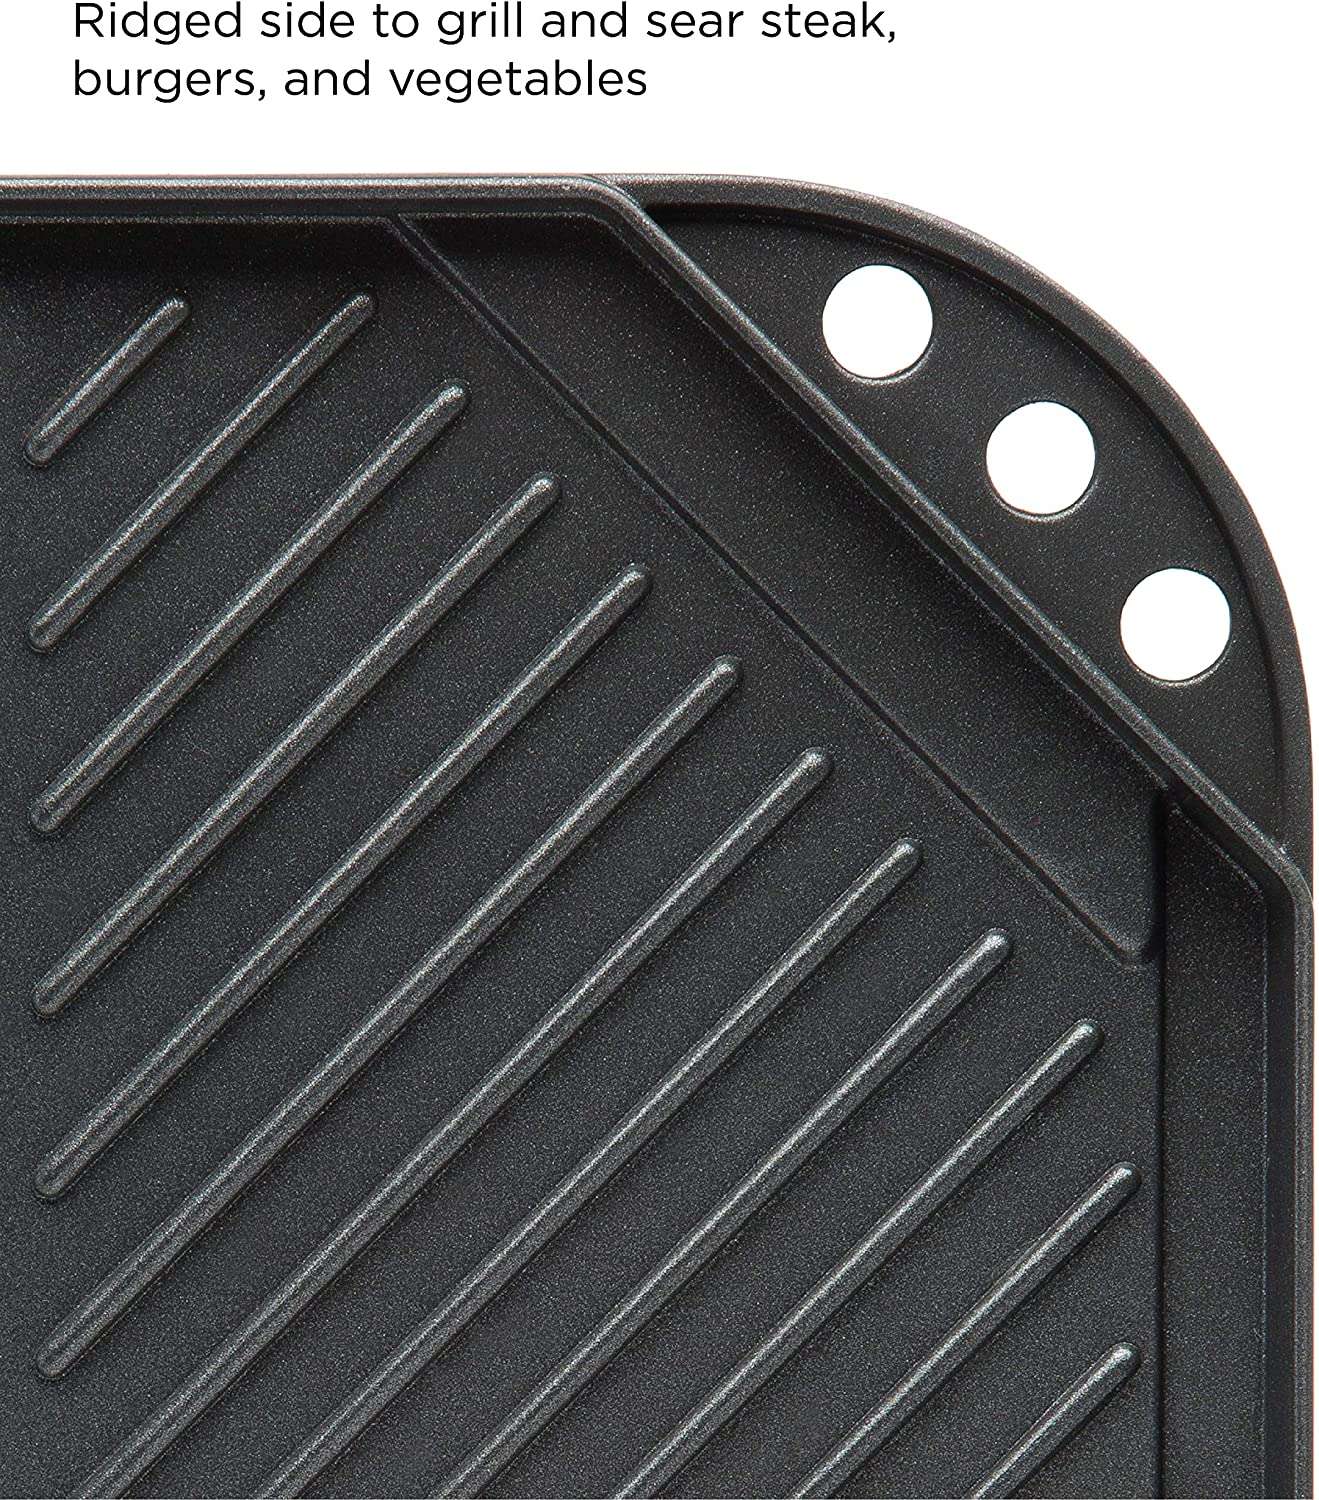 Reversible Cast Iron Grill Griddle Grill Plate